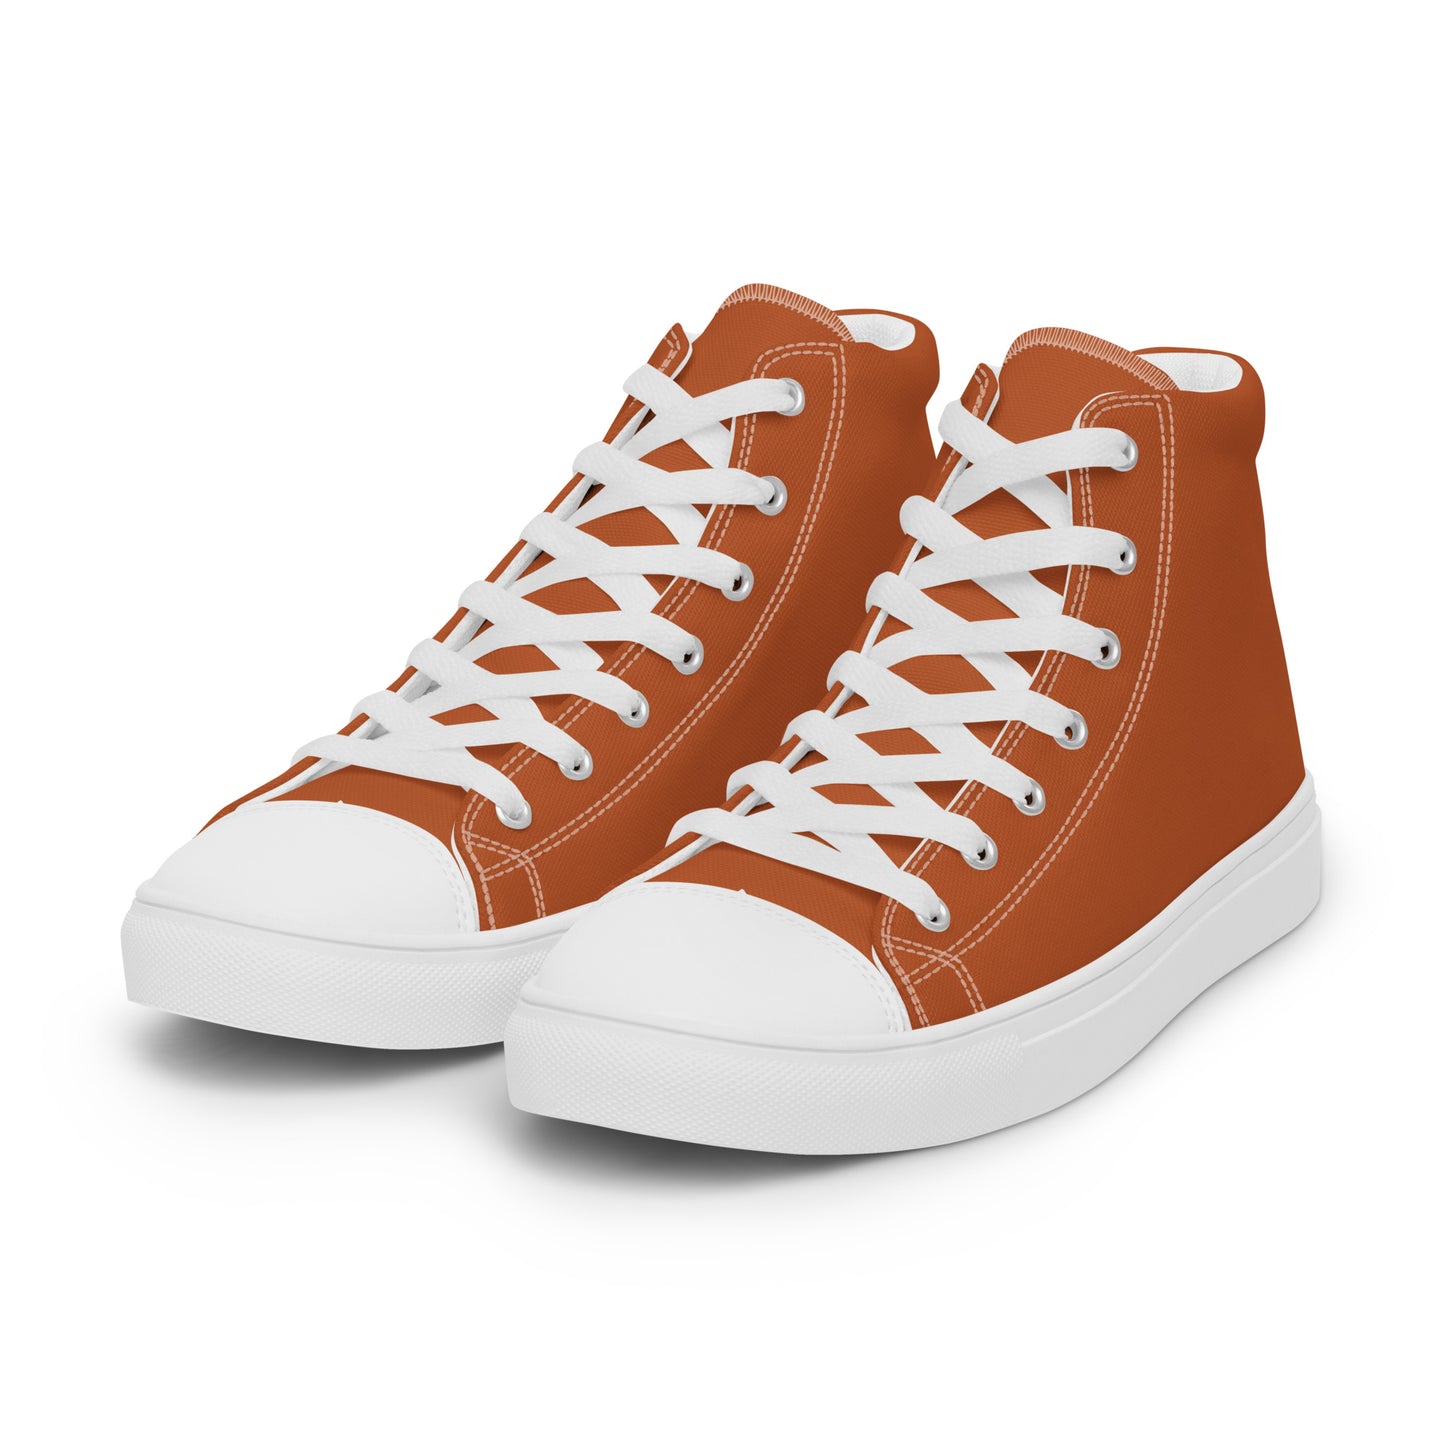 Honey Brown - Sustainably Made Men's High Top Canvas Shoes